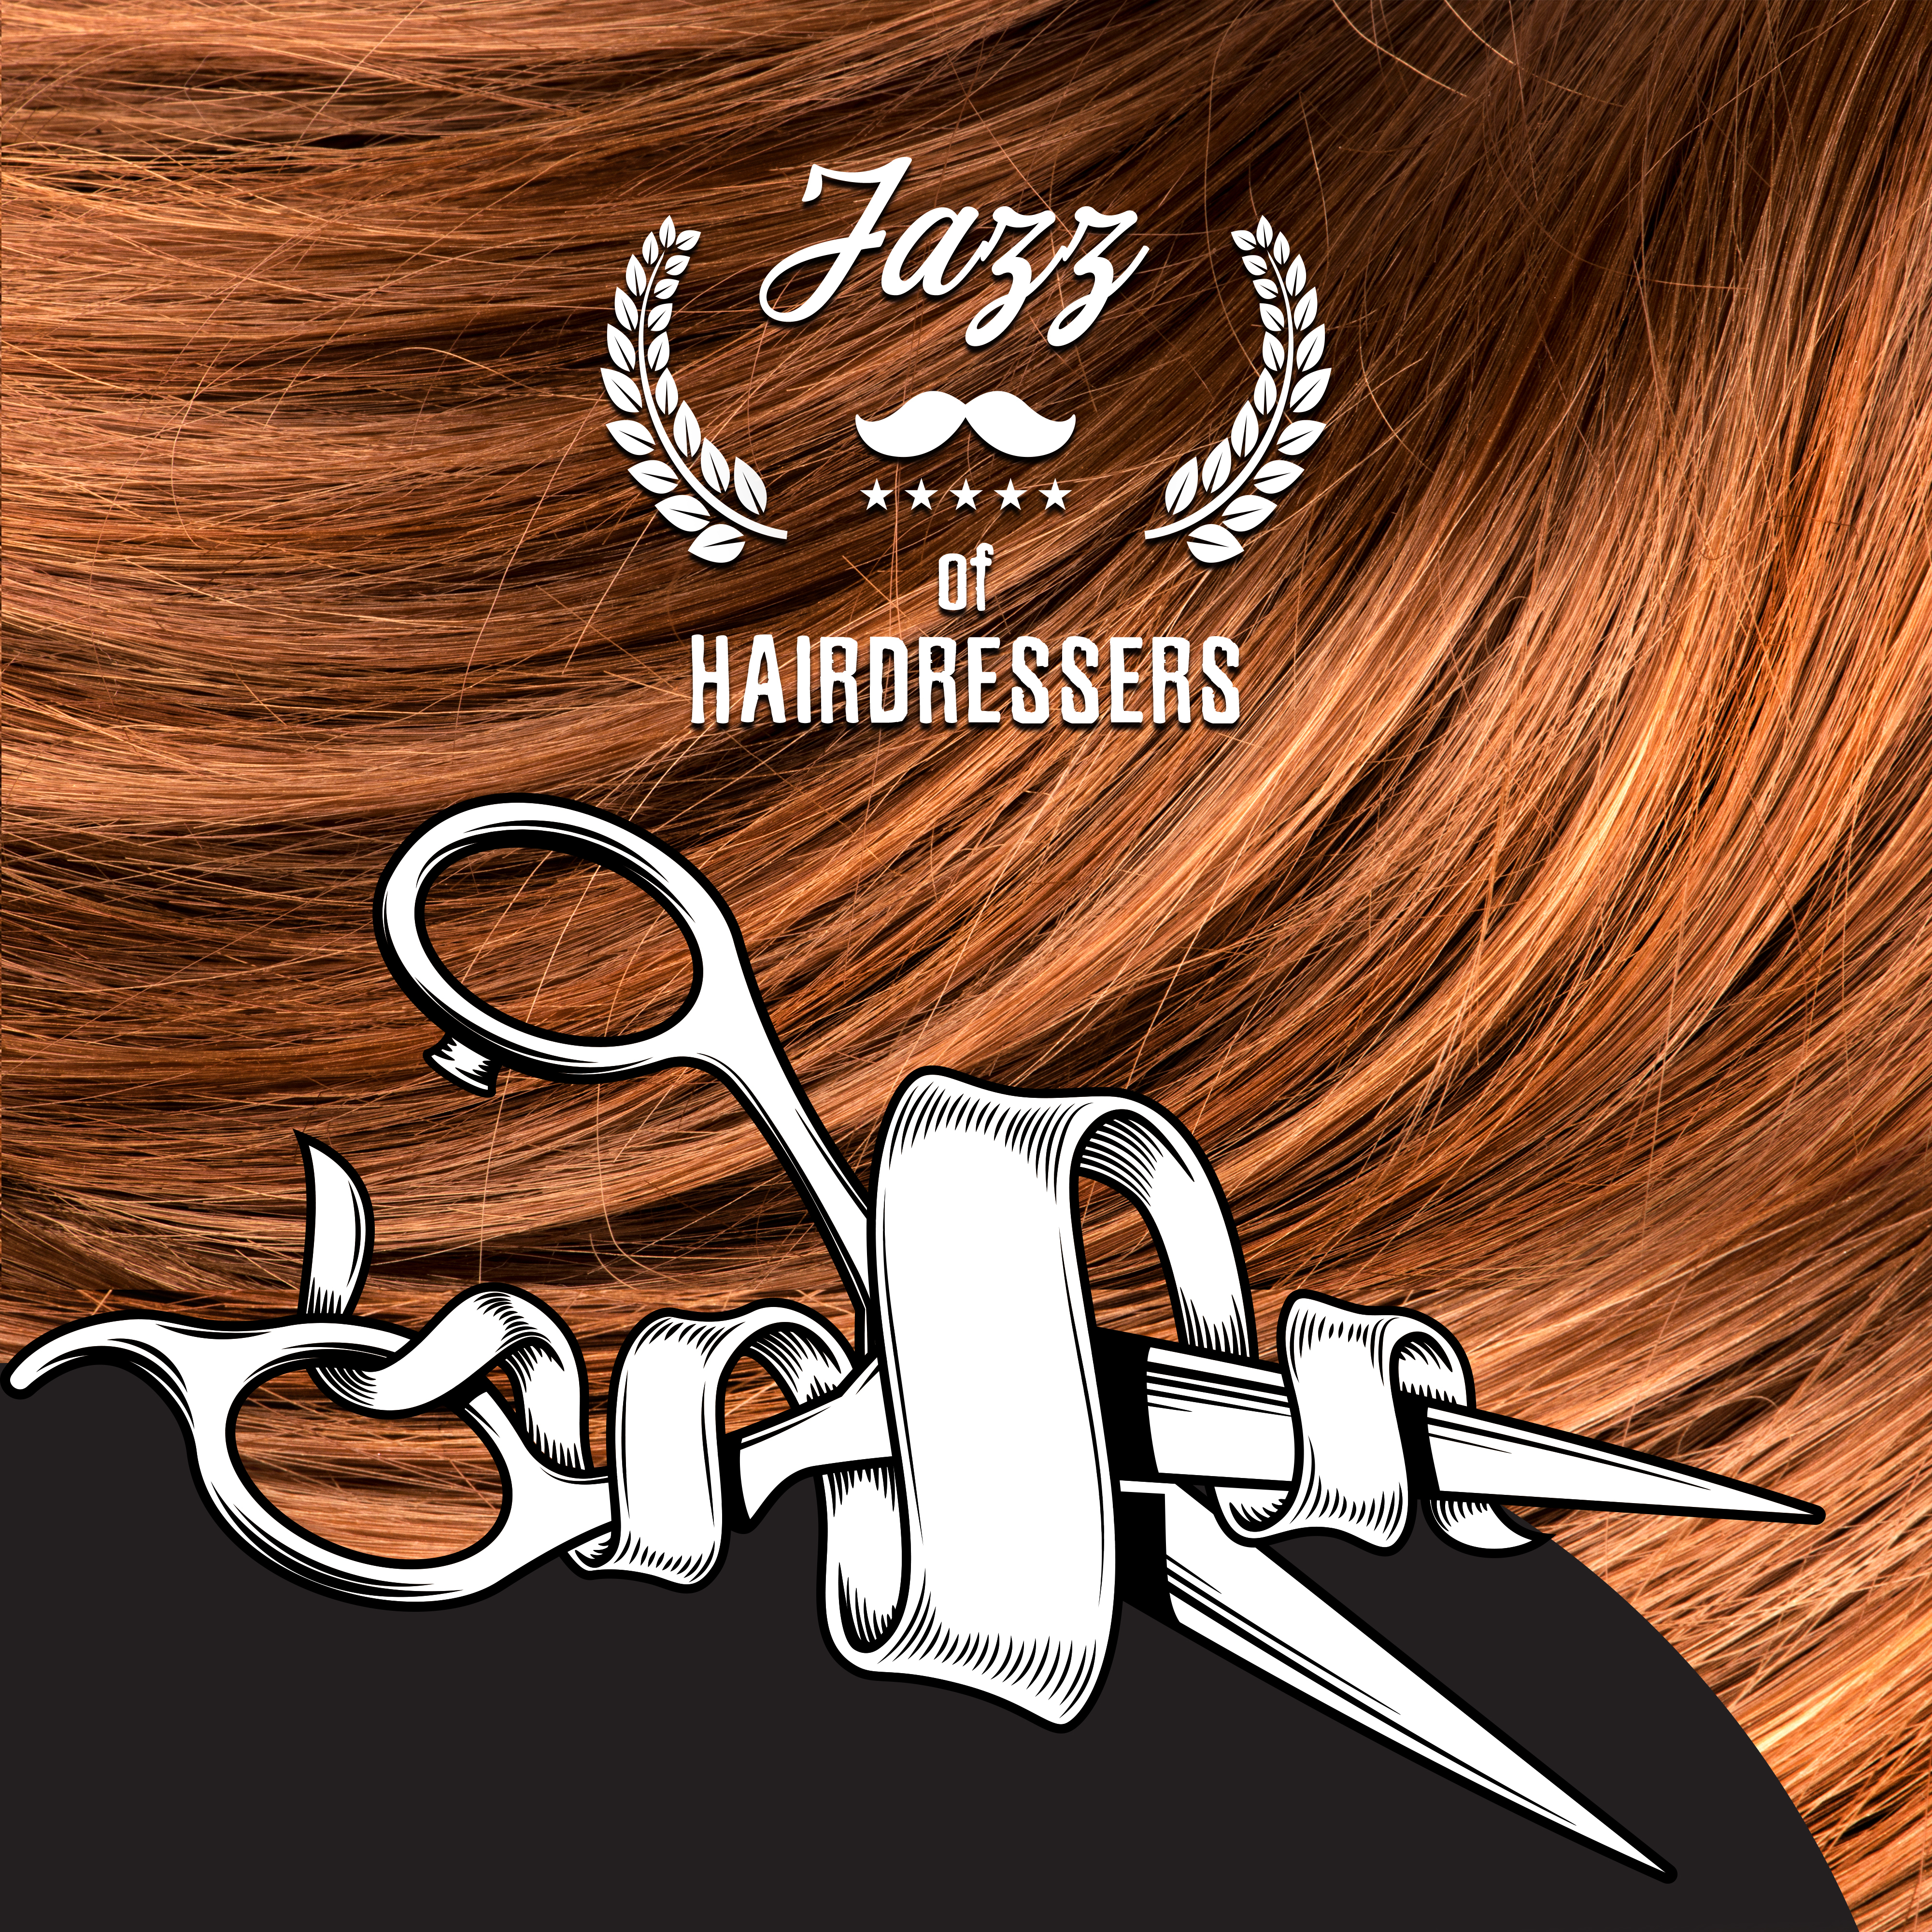 Jazz of Hairdressers  Music for Hairdressing Salons, Barber Shops and Beauty Salons